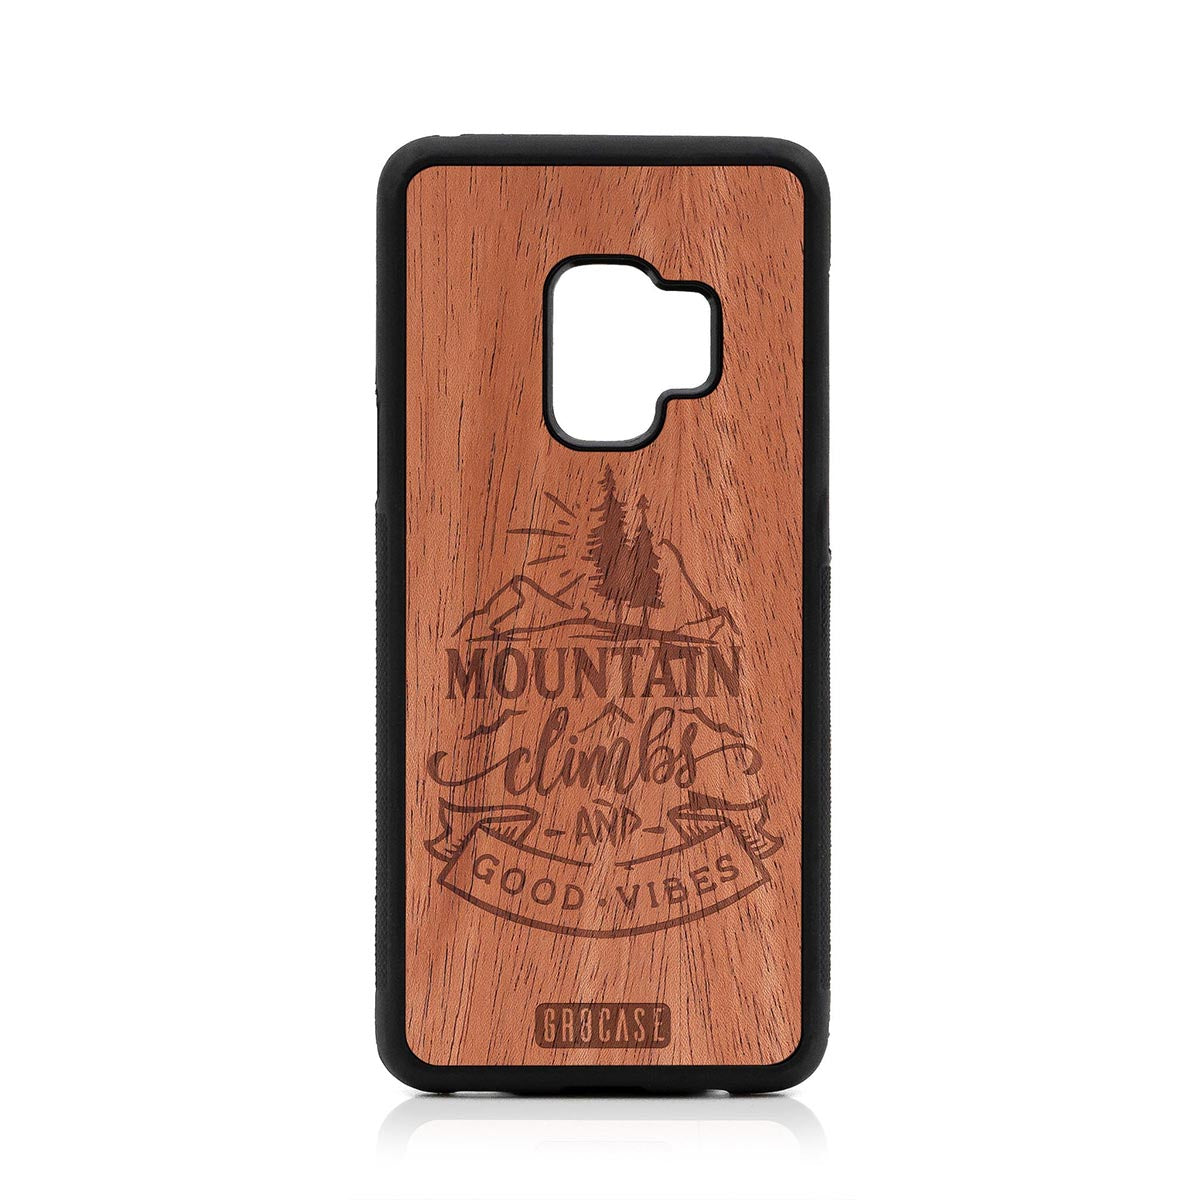 Mountain Climbs And Good Vibes Design Wood Case Samsung Galaxy S9 by GR8CASE